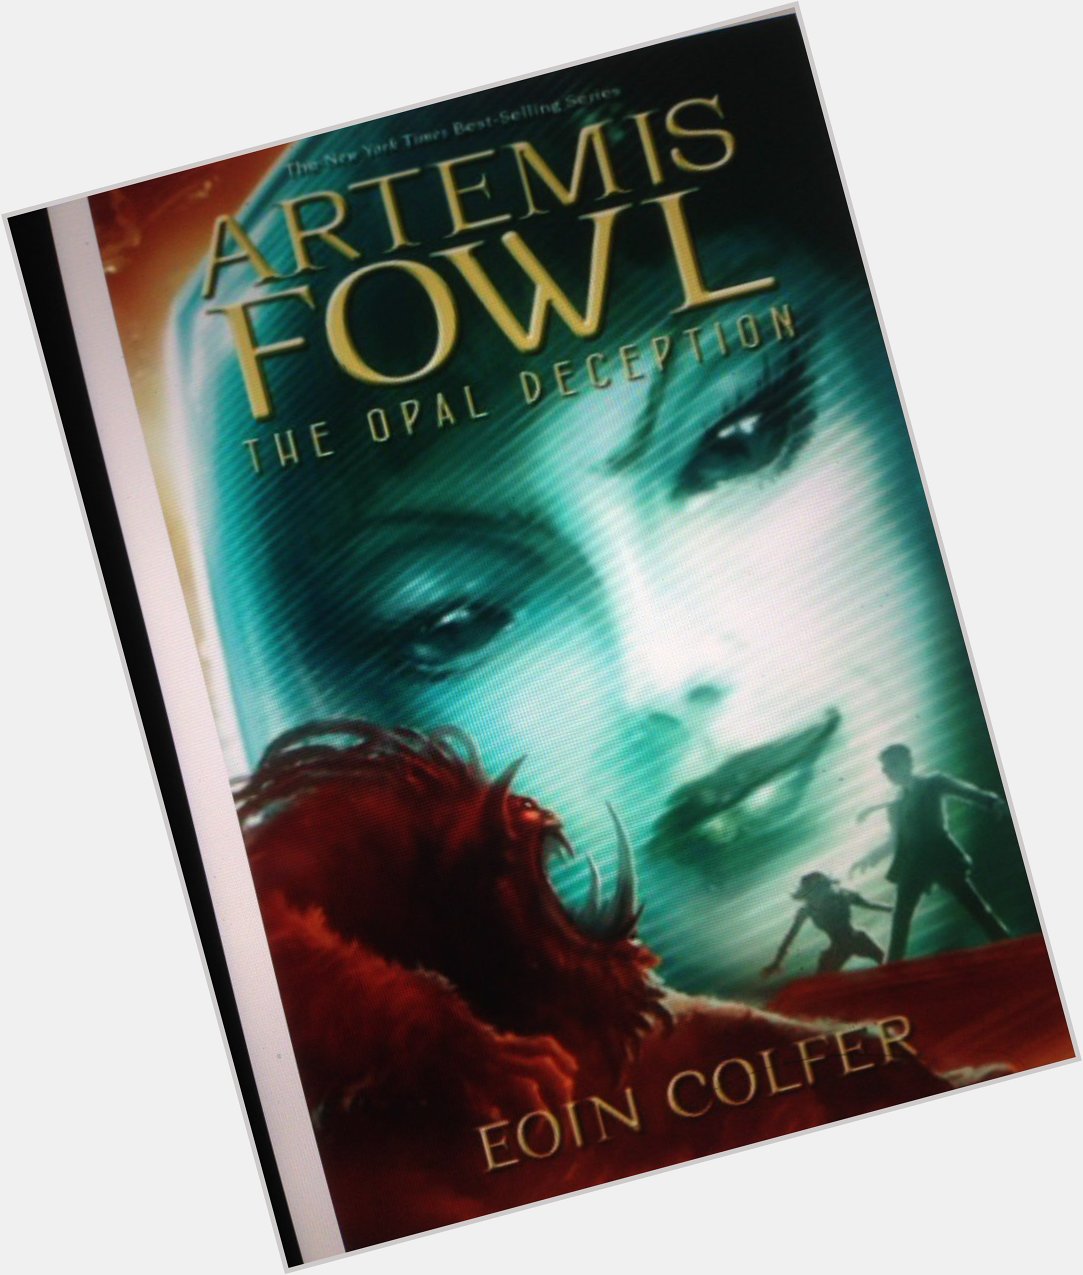 Happy Birthday Eoin Colfer! This is book four in the Artemis Fowl series! Have you read it yet? 